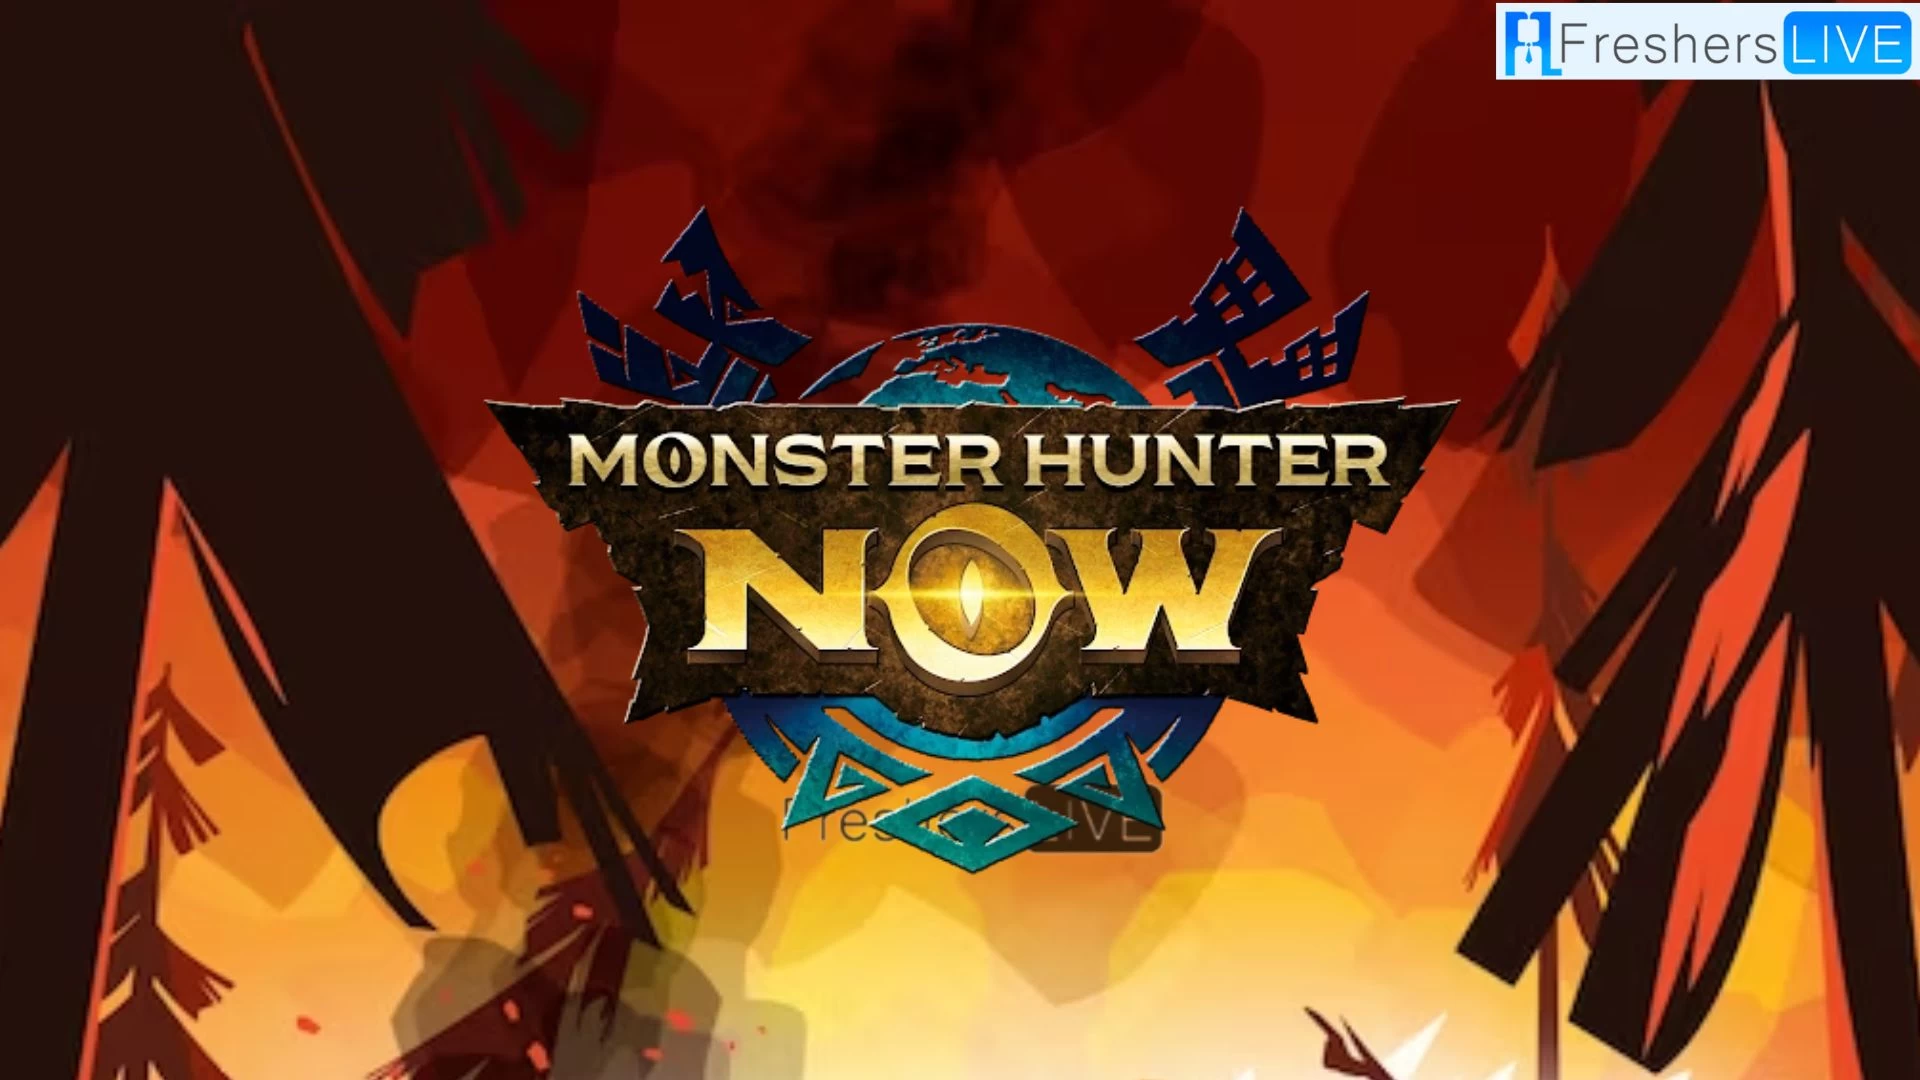 Monster Hunter Now Unlock Weapons, How to Unlock New Weapon in Monster Hunter Now?